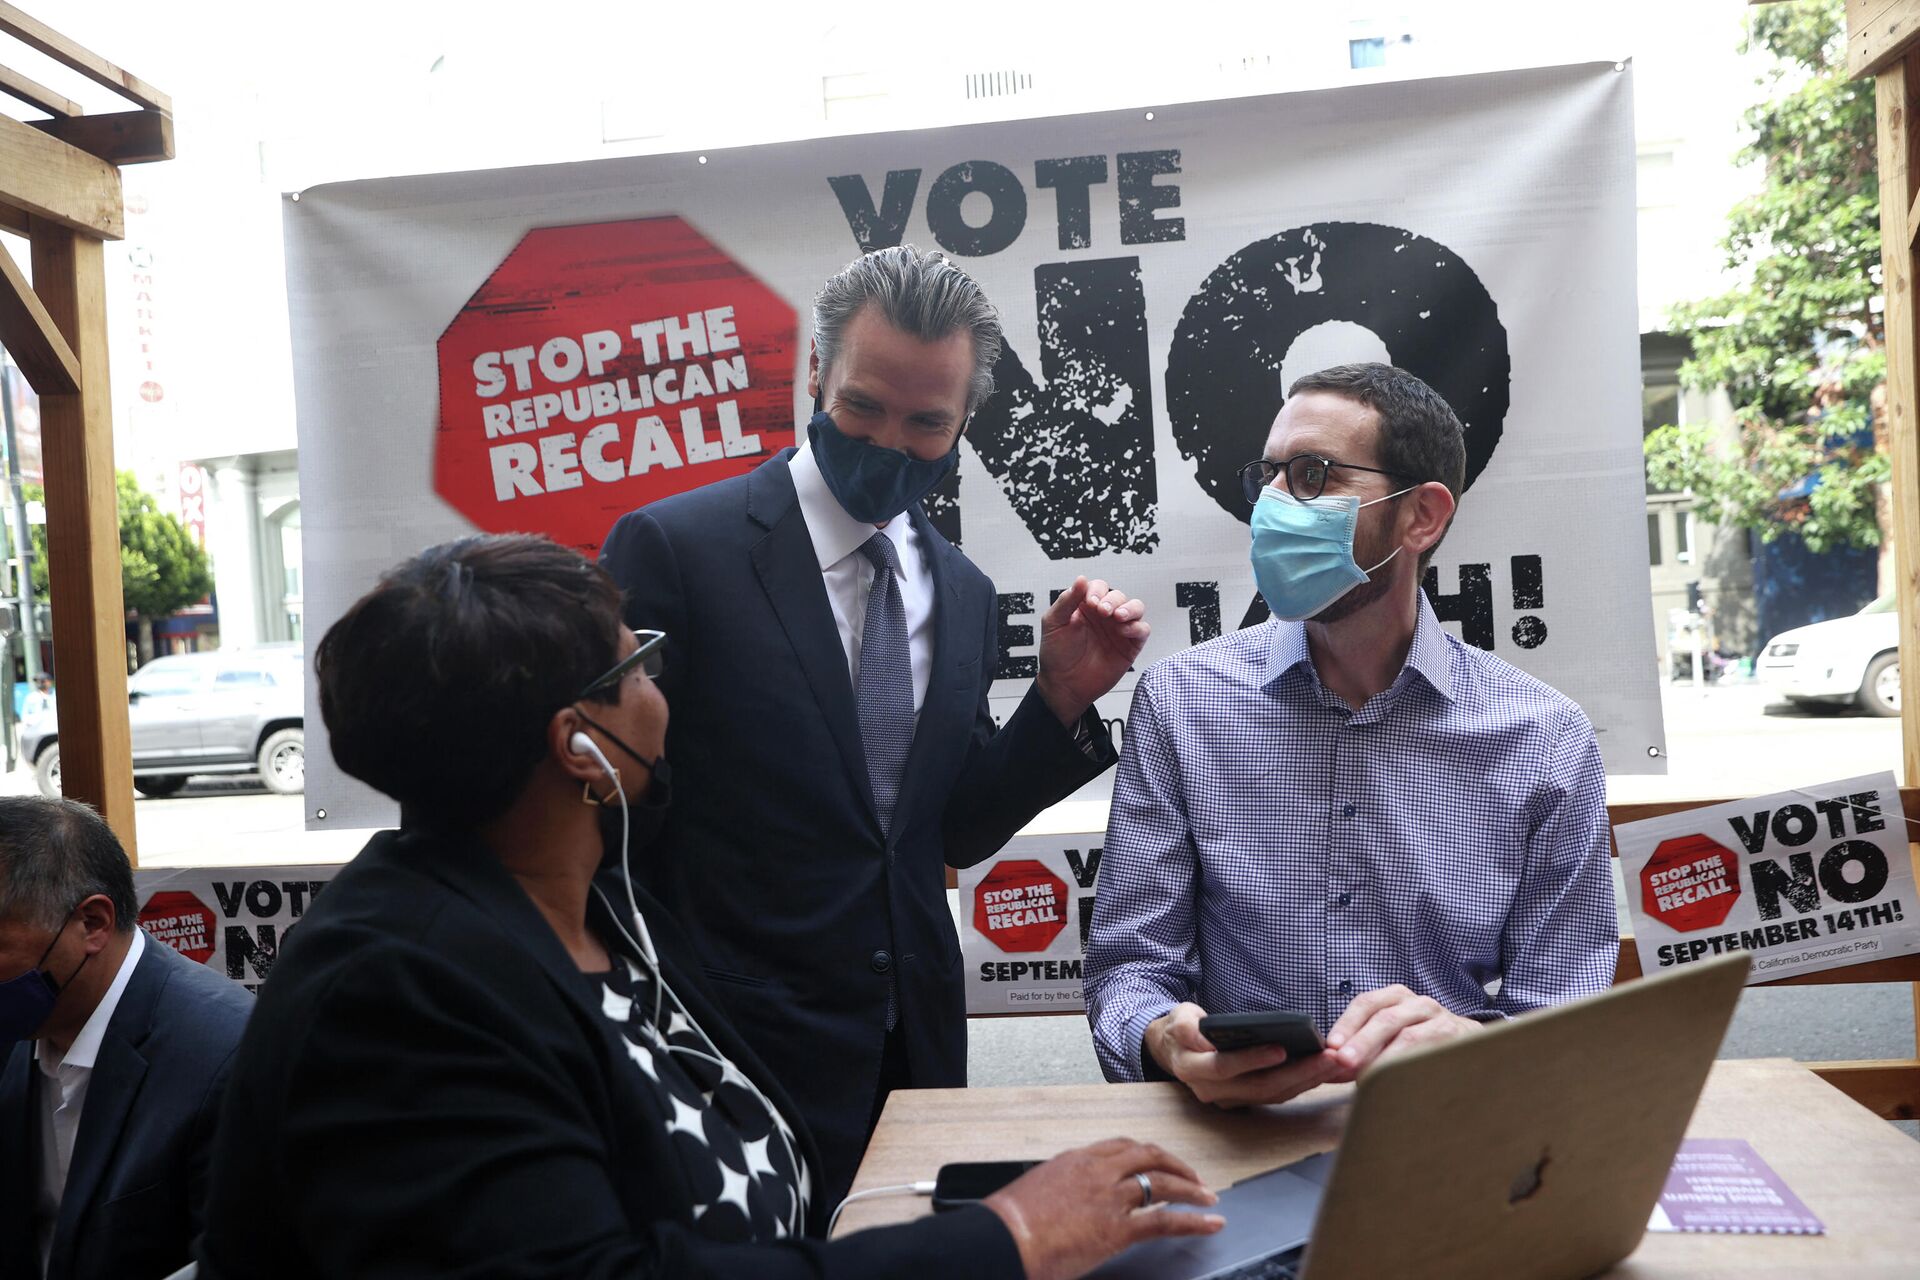 California Gov. Gavin Newsom (C) talks with California State Sen. Scott Wiener (R) and a volunteer (L) who is phone banking against the recall at Manny's on August 13, 2021 in San Francisco, California. California Gov. Gavin Newsom kicked off his Say No to recall campaign as he prepares to face a recall election on September 14 - Sputnik International, 1920, 14.09.2021